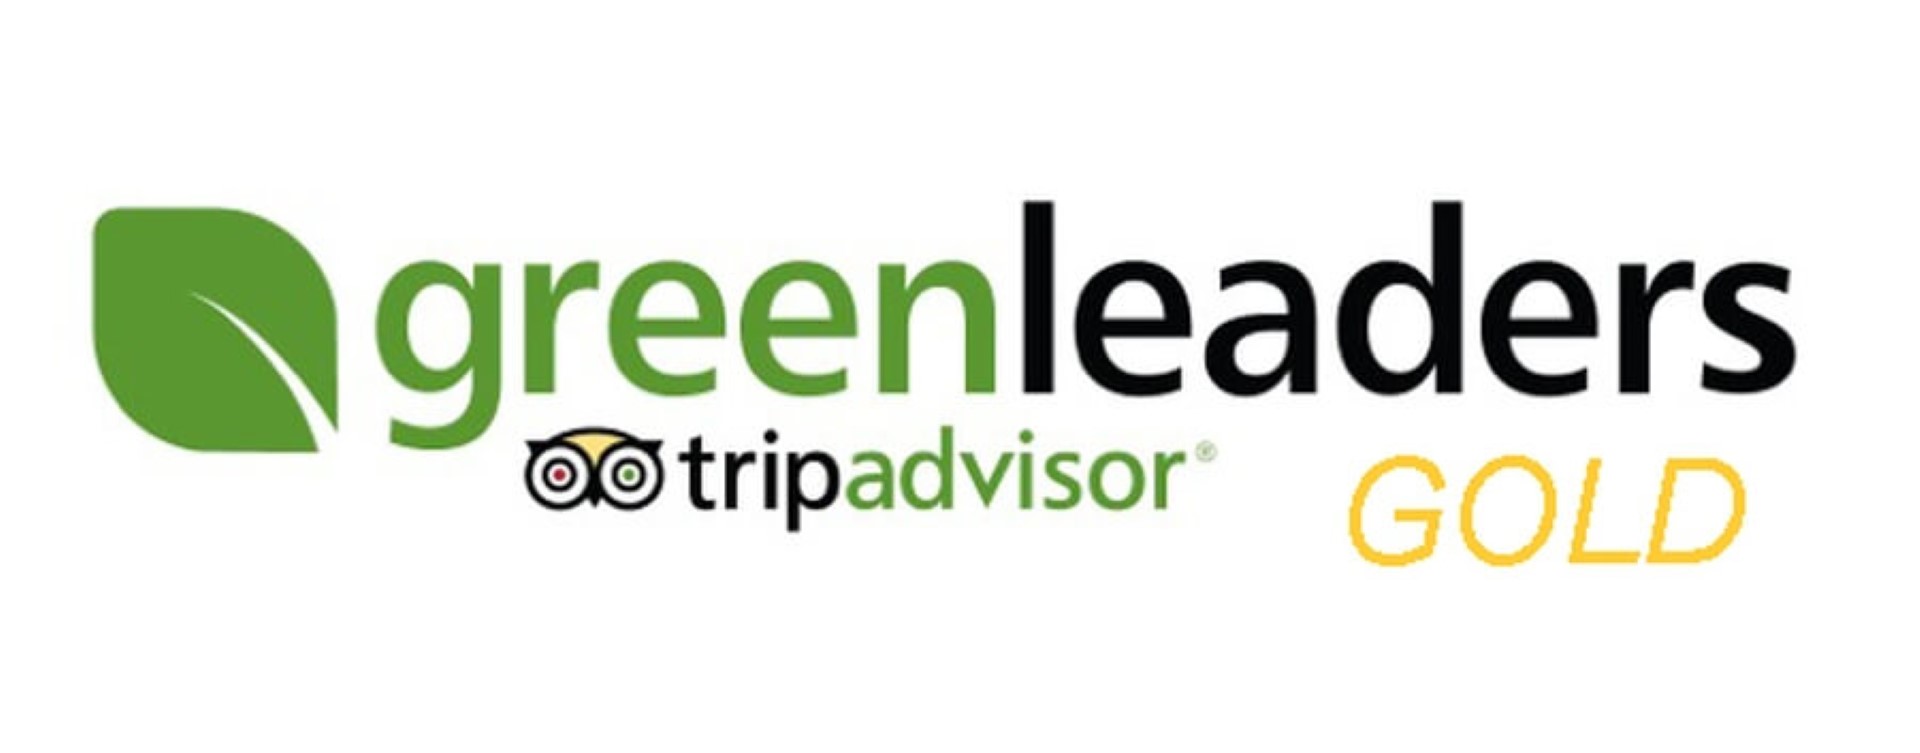 label of gold status with tripadvisor green leaders